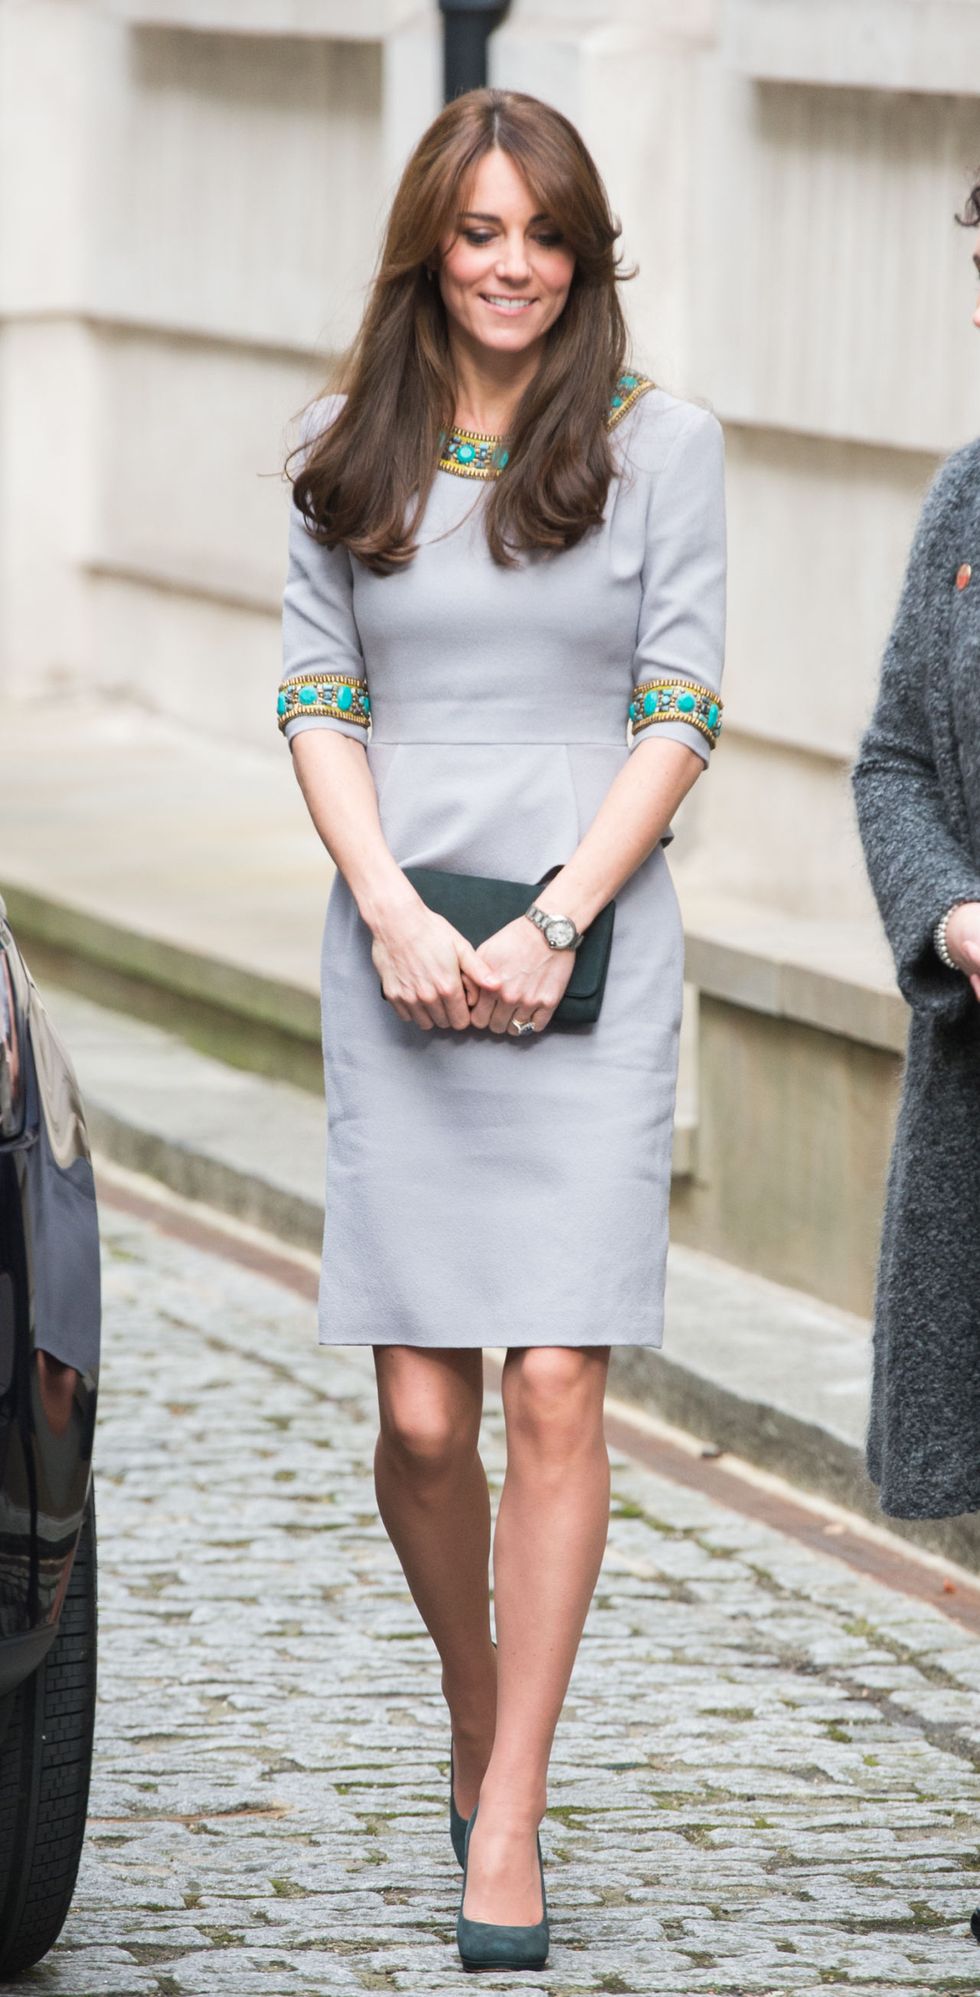 LONDON, ENGLAND - NOVEMBER 18:  Catherine, Duchess of Cambridge attends Place2Be Headteacher Conference at Bank of America Merrill Lynch on November 18, 2015 in London, England.  (Photo by Samir Hussein/WireImage)